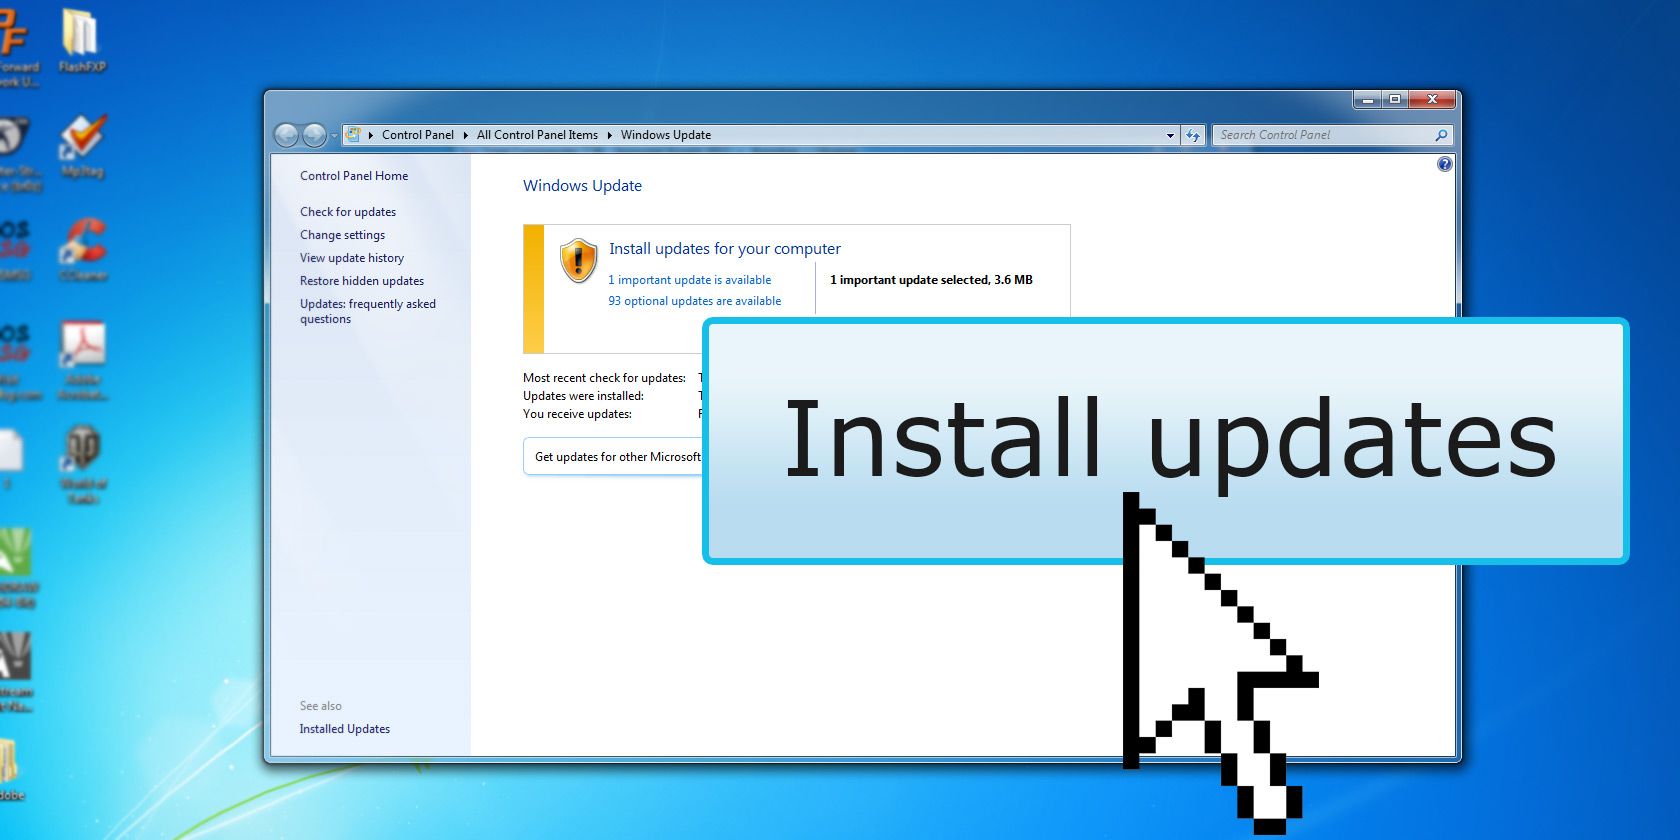 Windows PC desktop with large Install Updates button showing